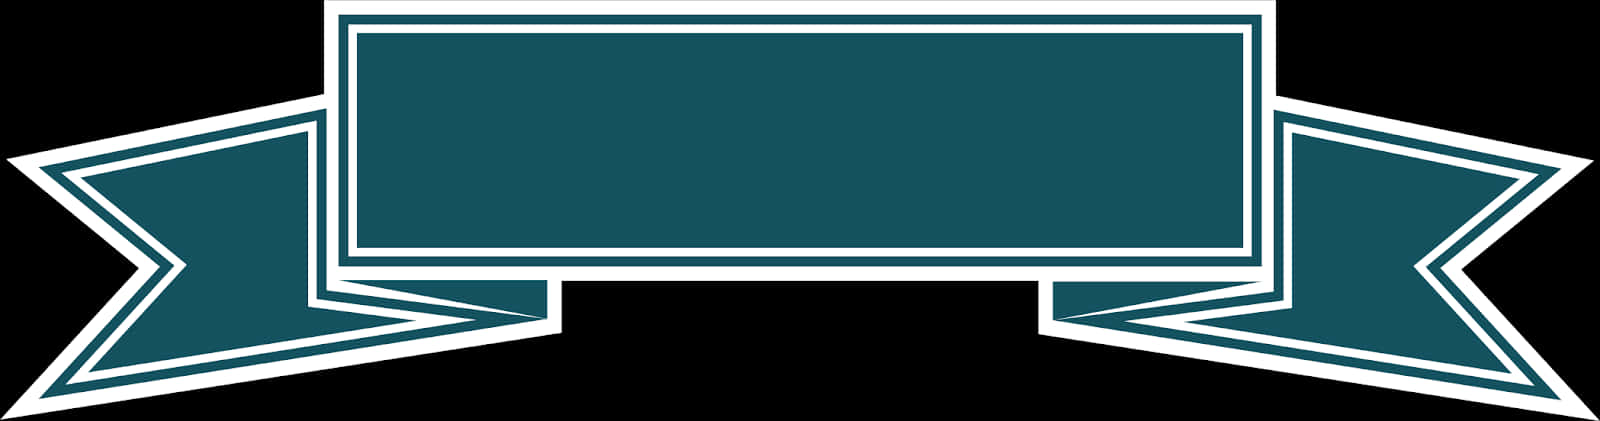 Teal Accented Blank Banner Design PNG